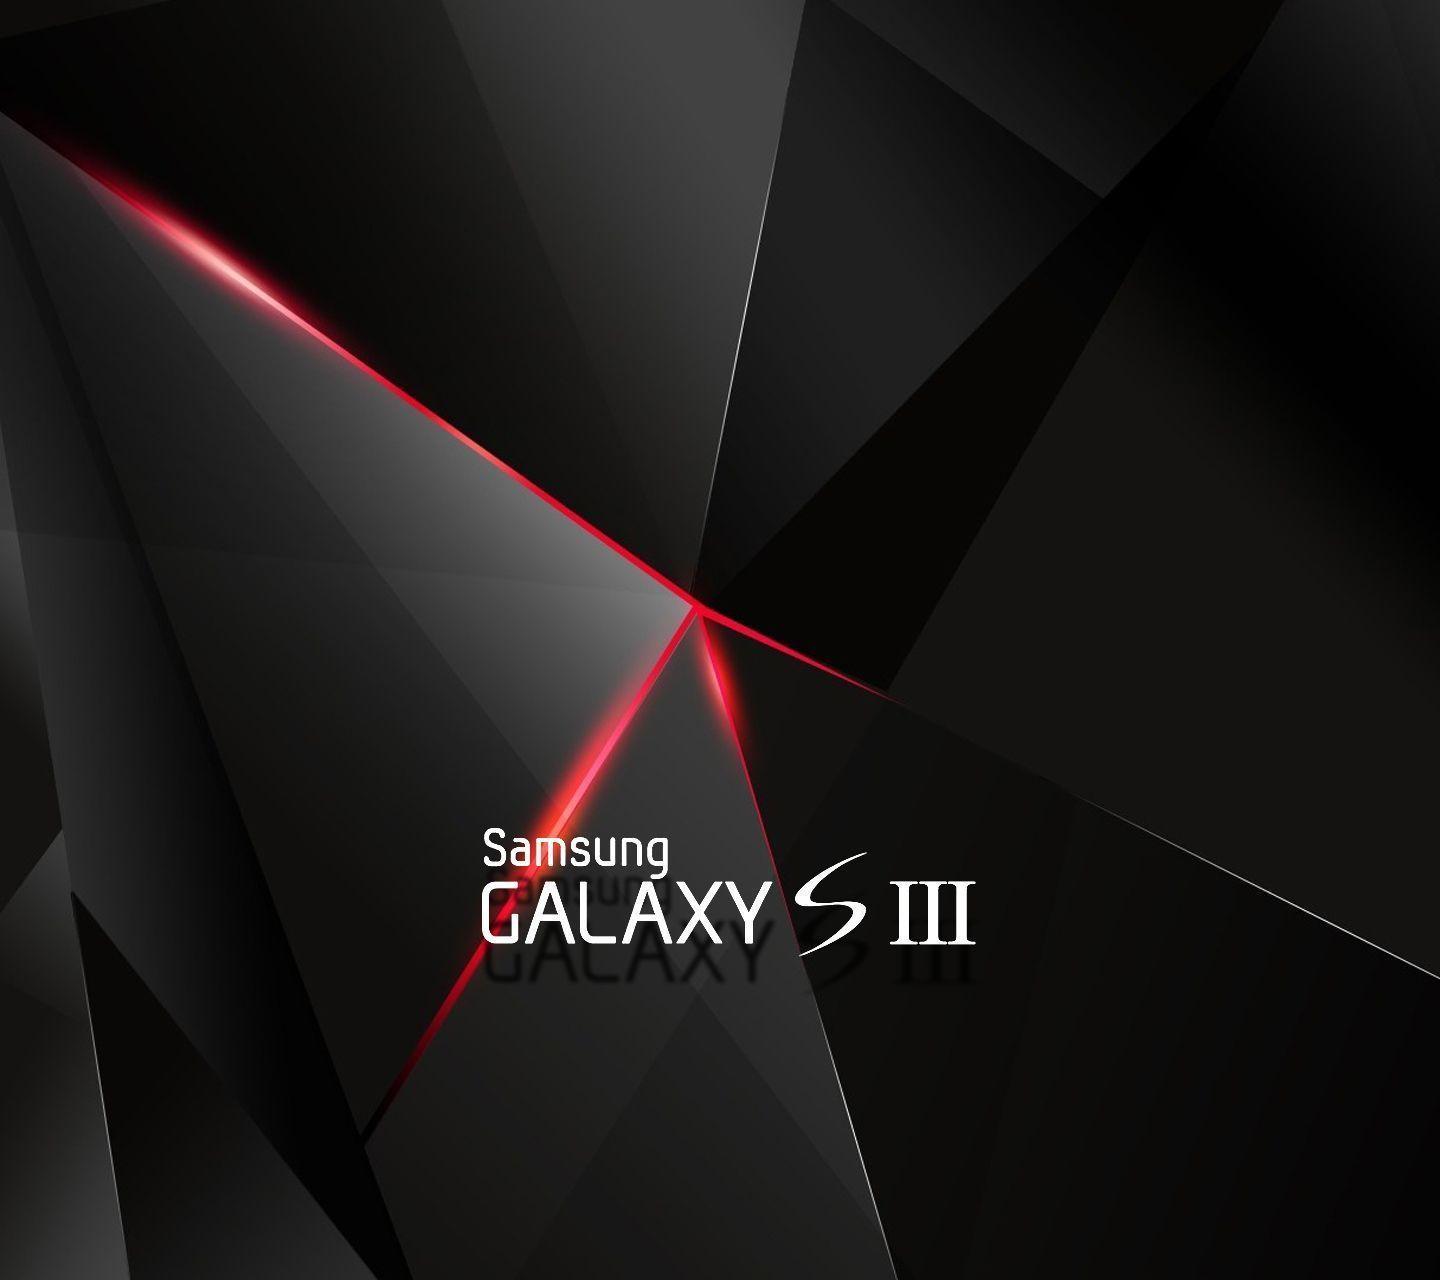 High Definition Wallpaper For Samsung Galaxy S3